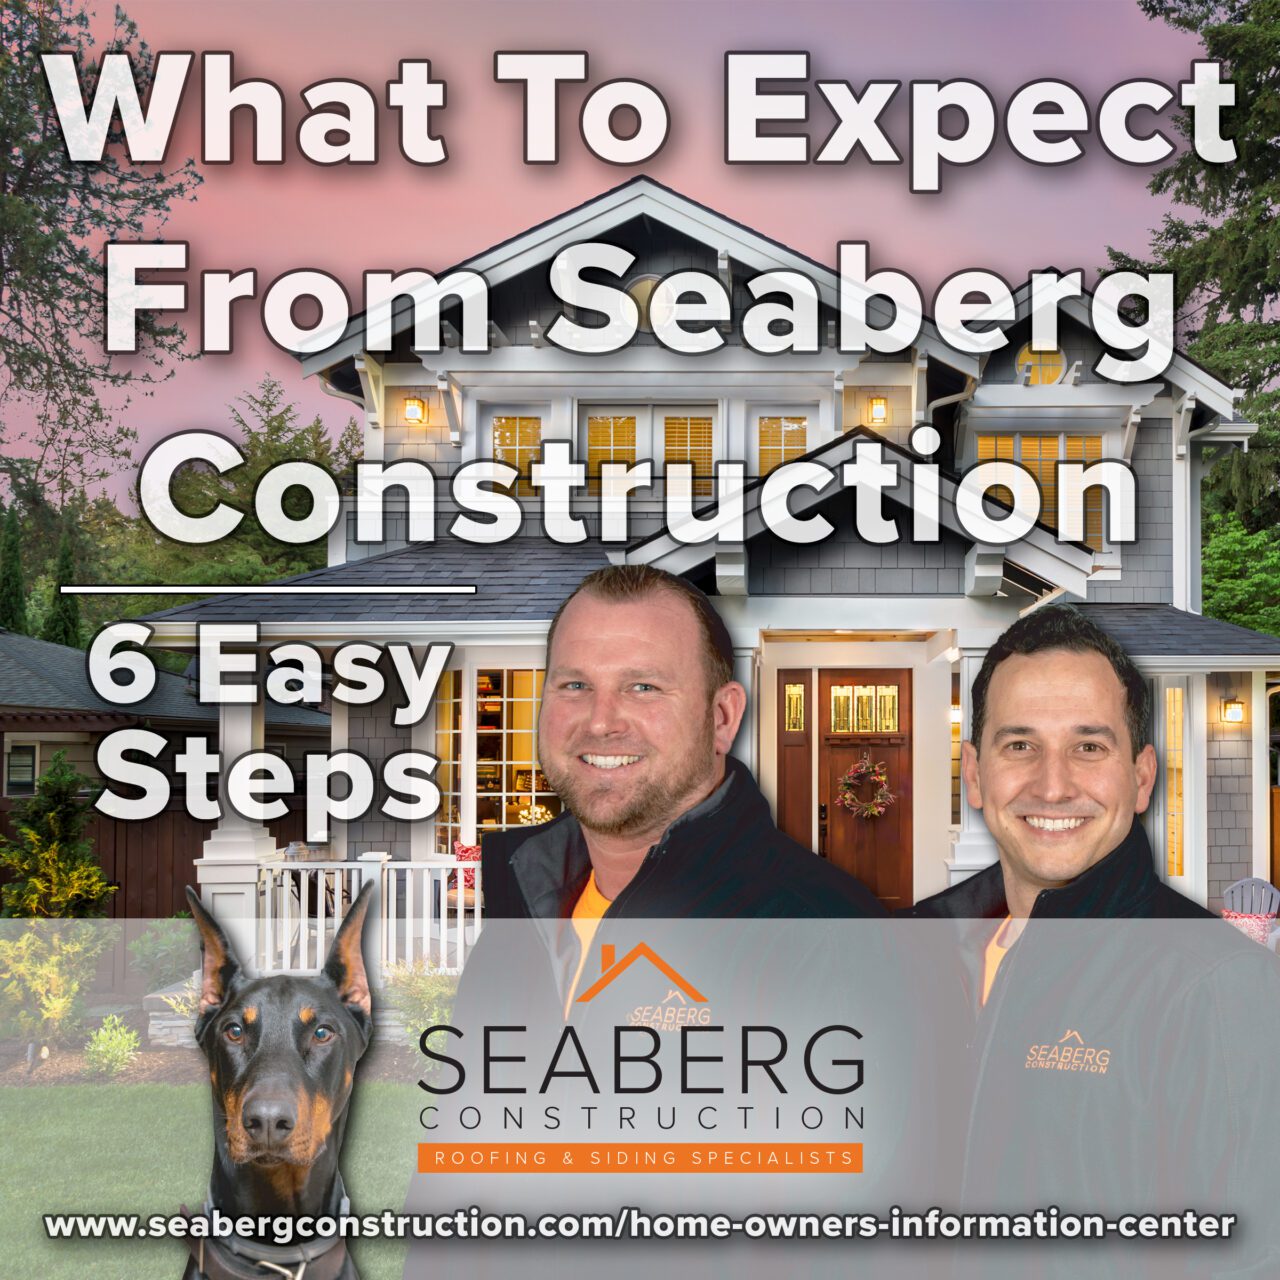 What To Expect From Seaberg Construction: 6 Easy Steps